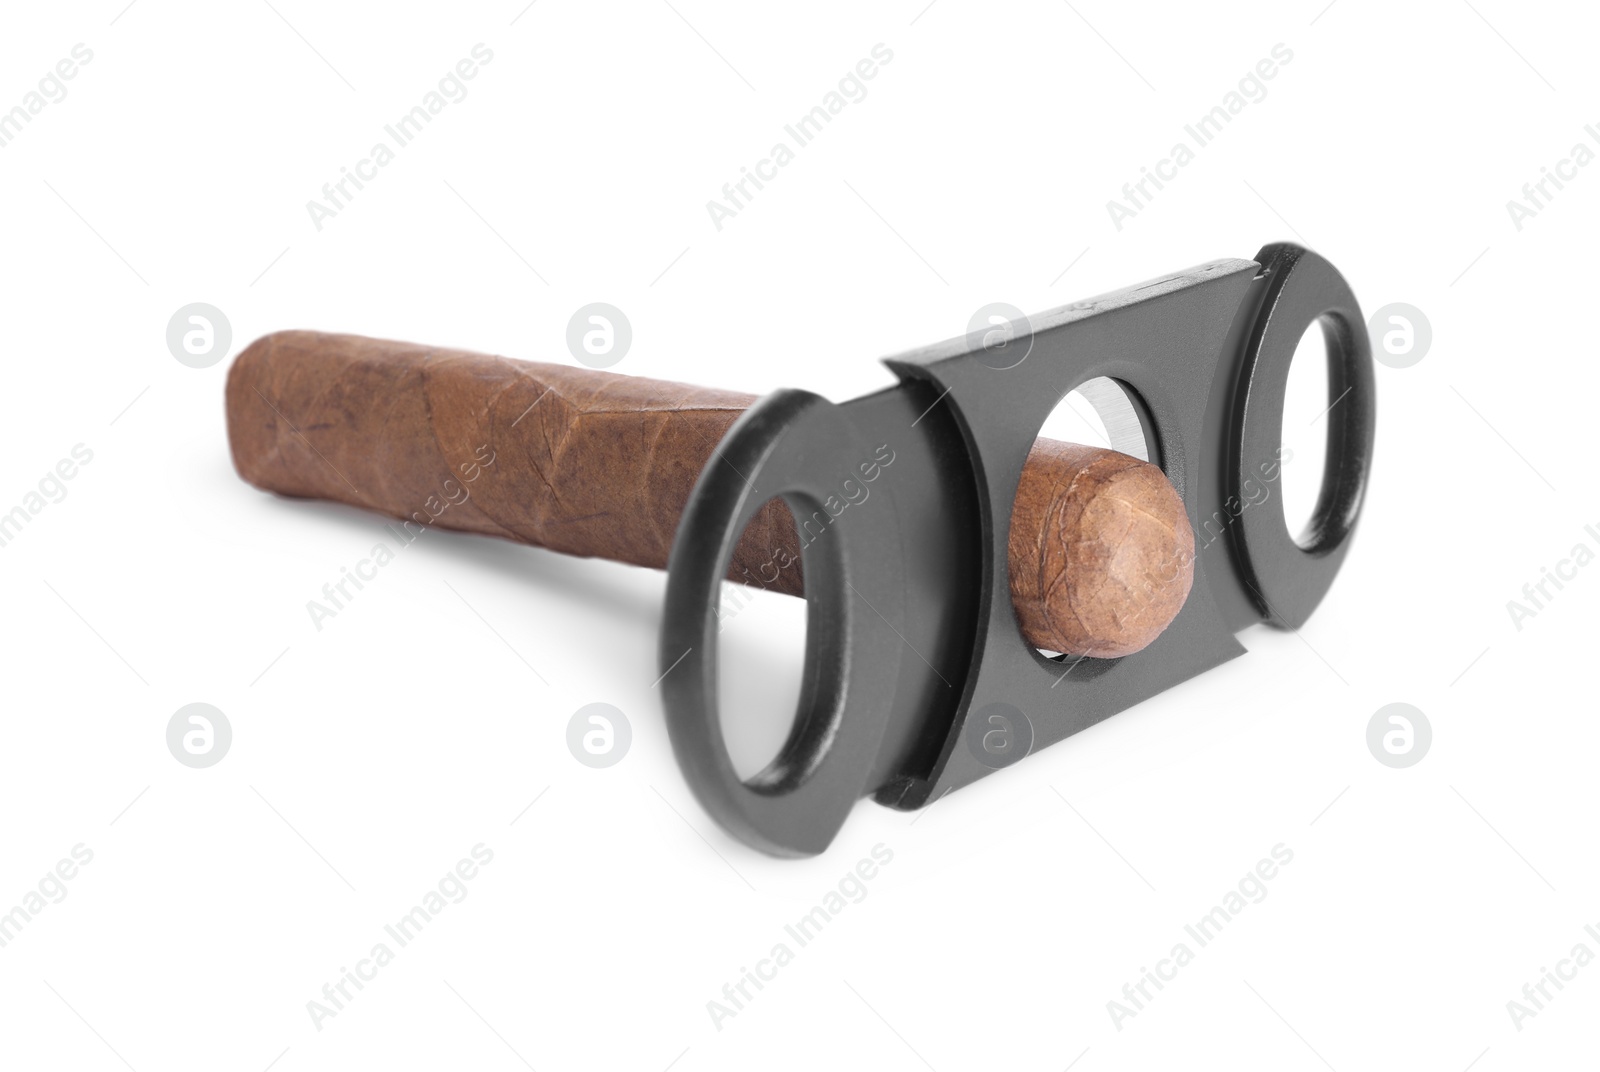 Photo of Cigar wrapped in tobacco leaf and cutter isolated on white